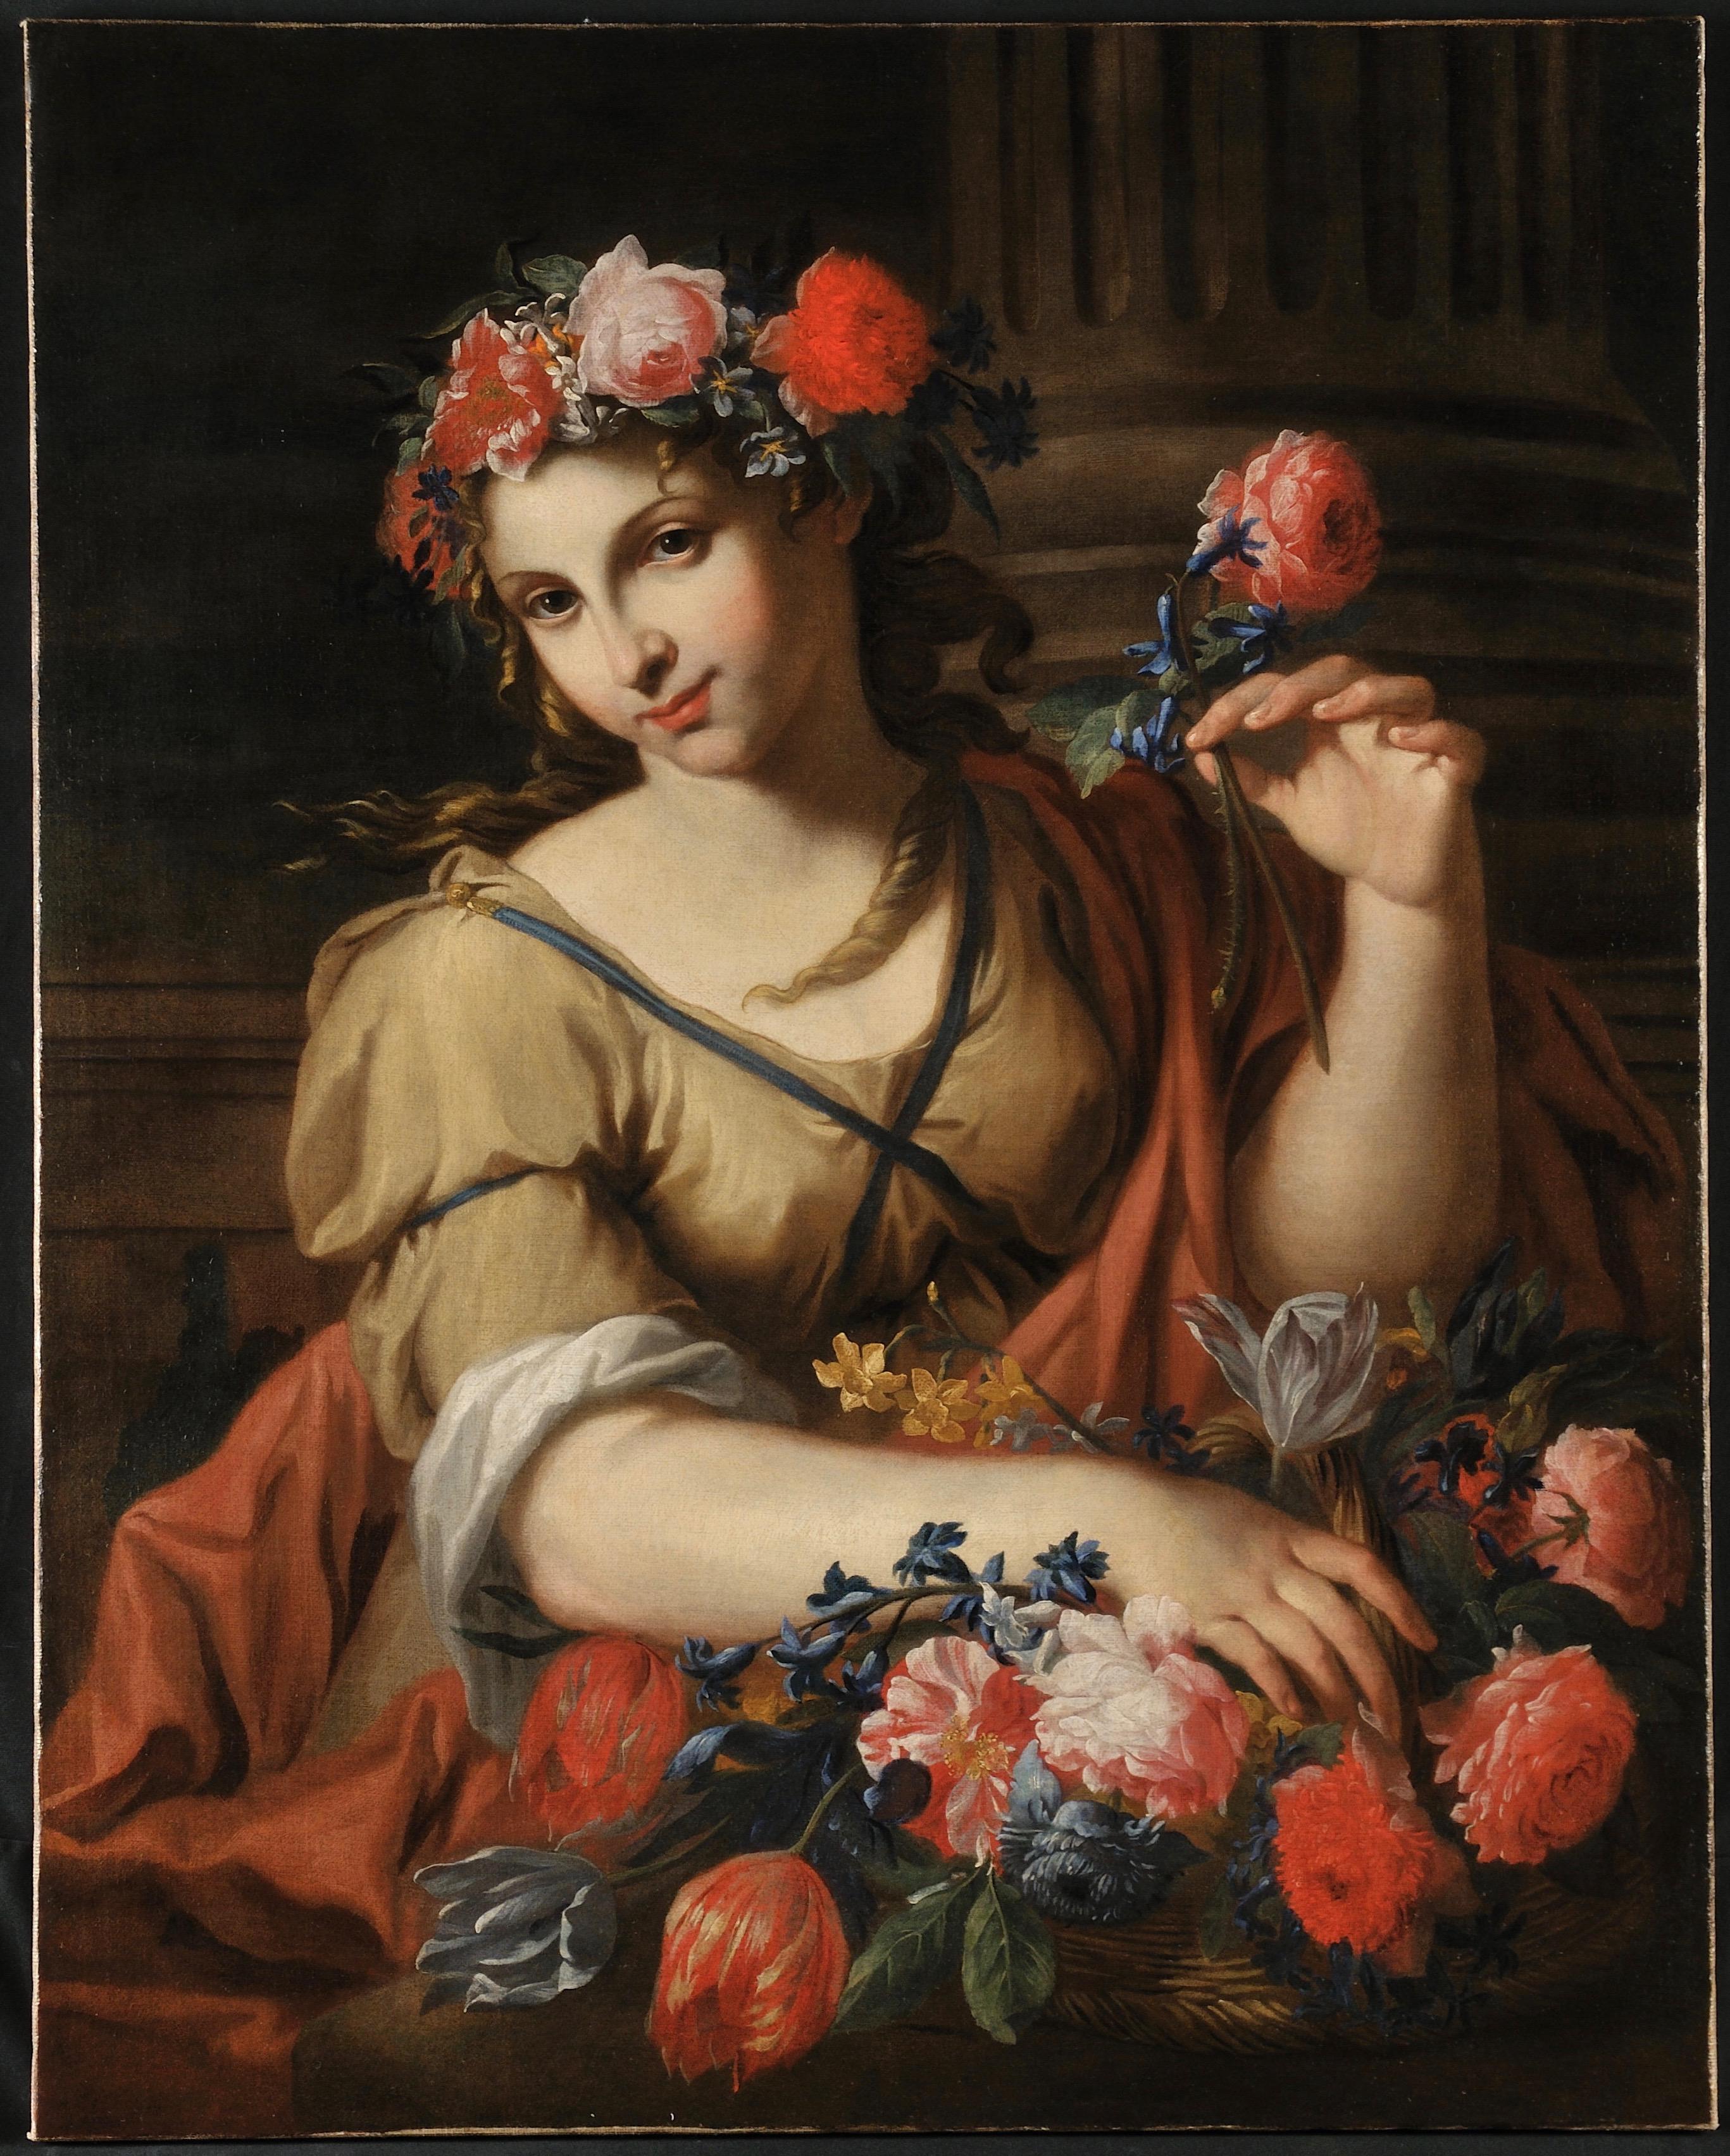 Antonio Franchi called Il Lucchese Portrait Painting - 17th Century Baroque Style Antonio Franchi Lady with Flowers Oil on Canvas Red